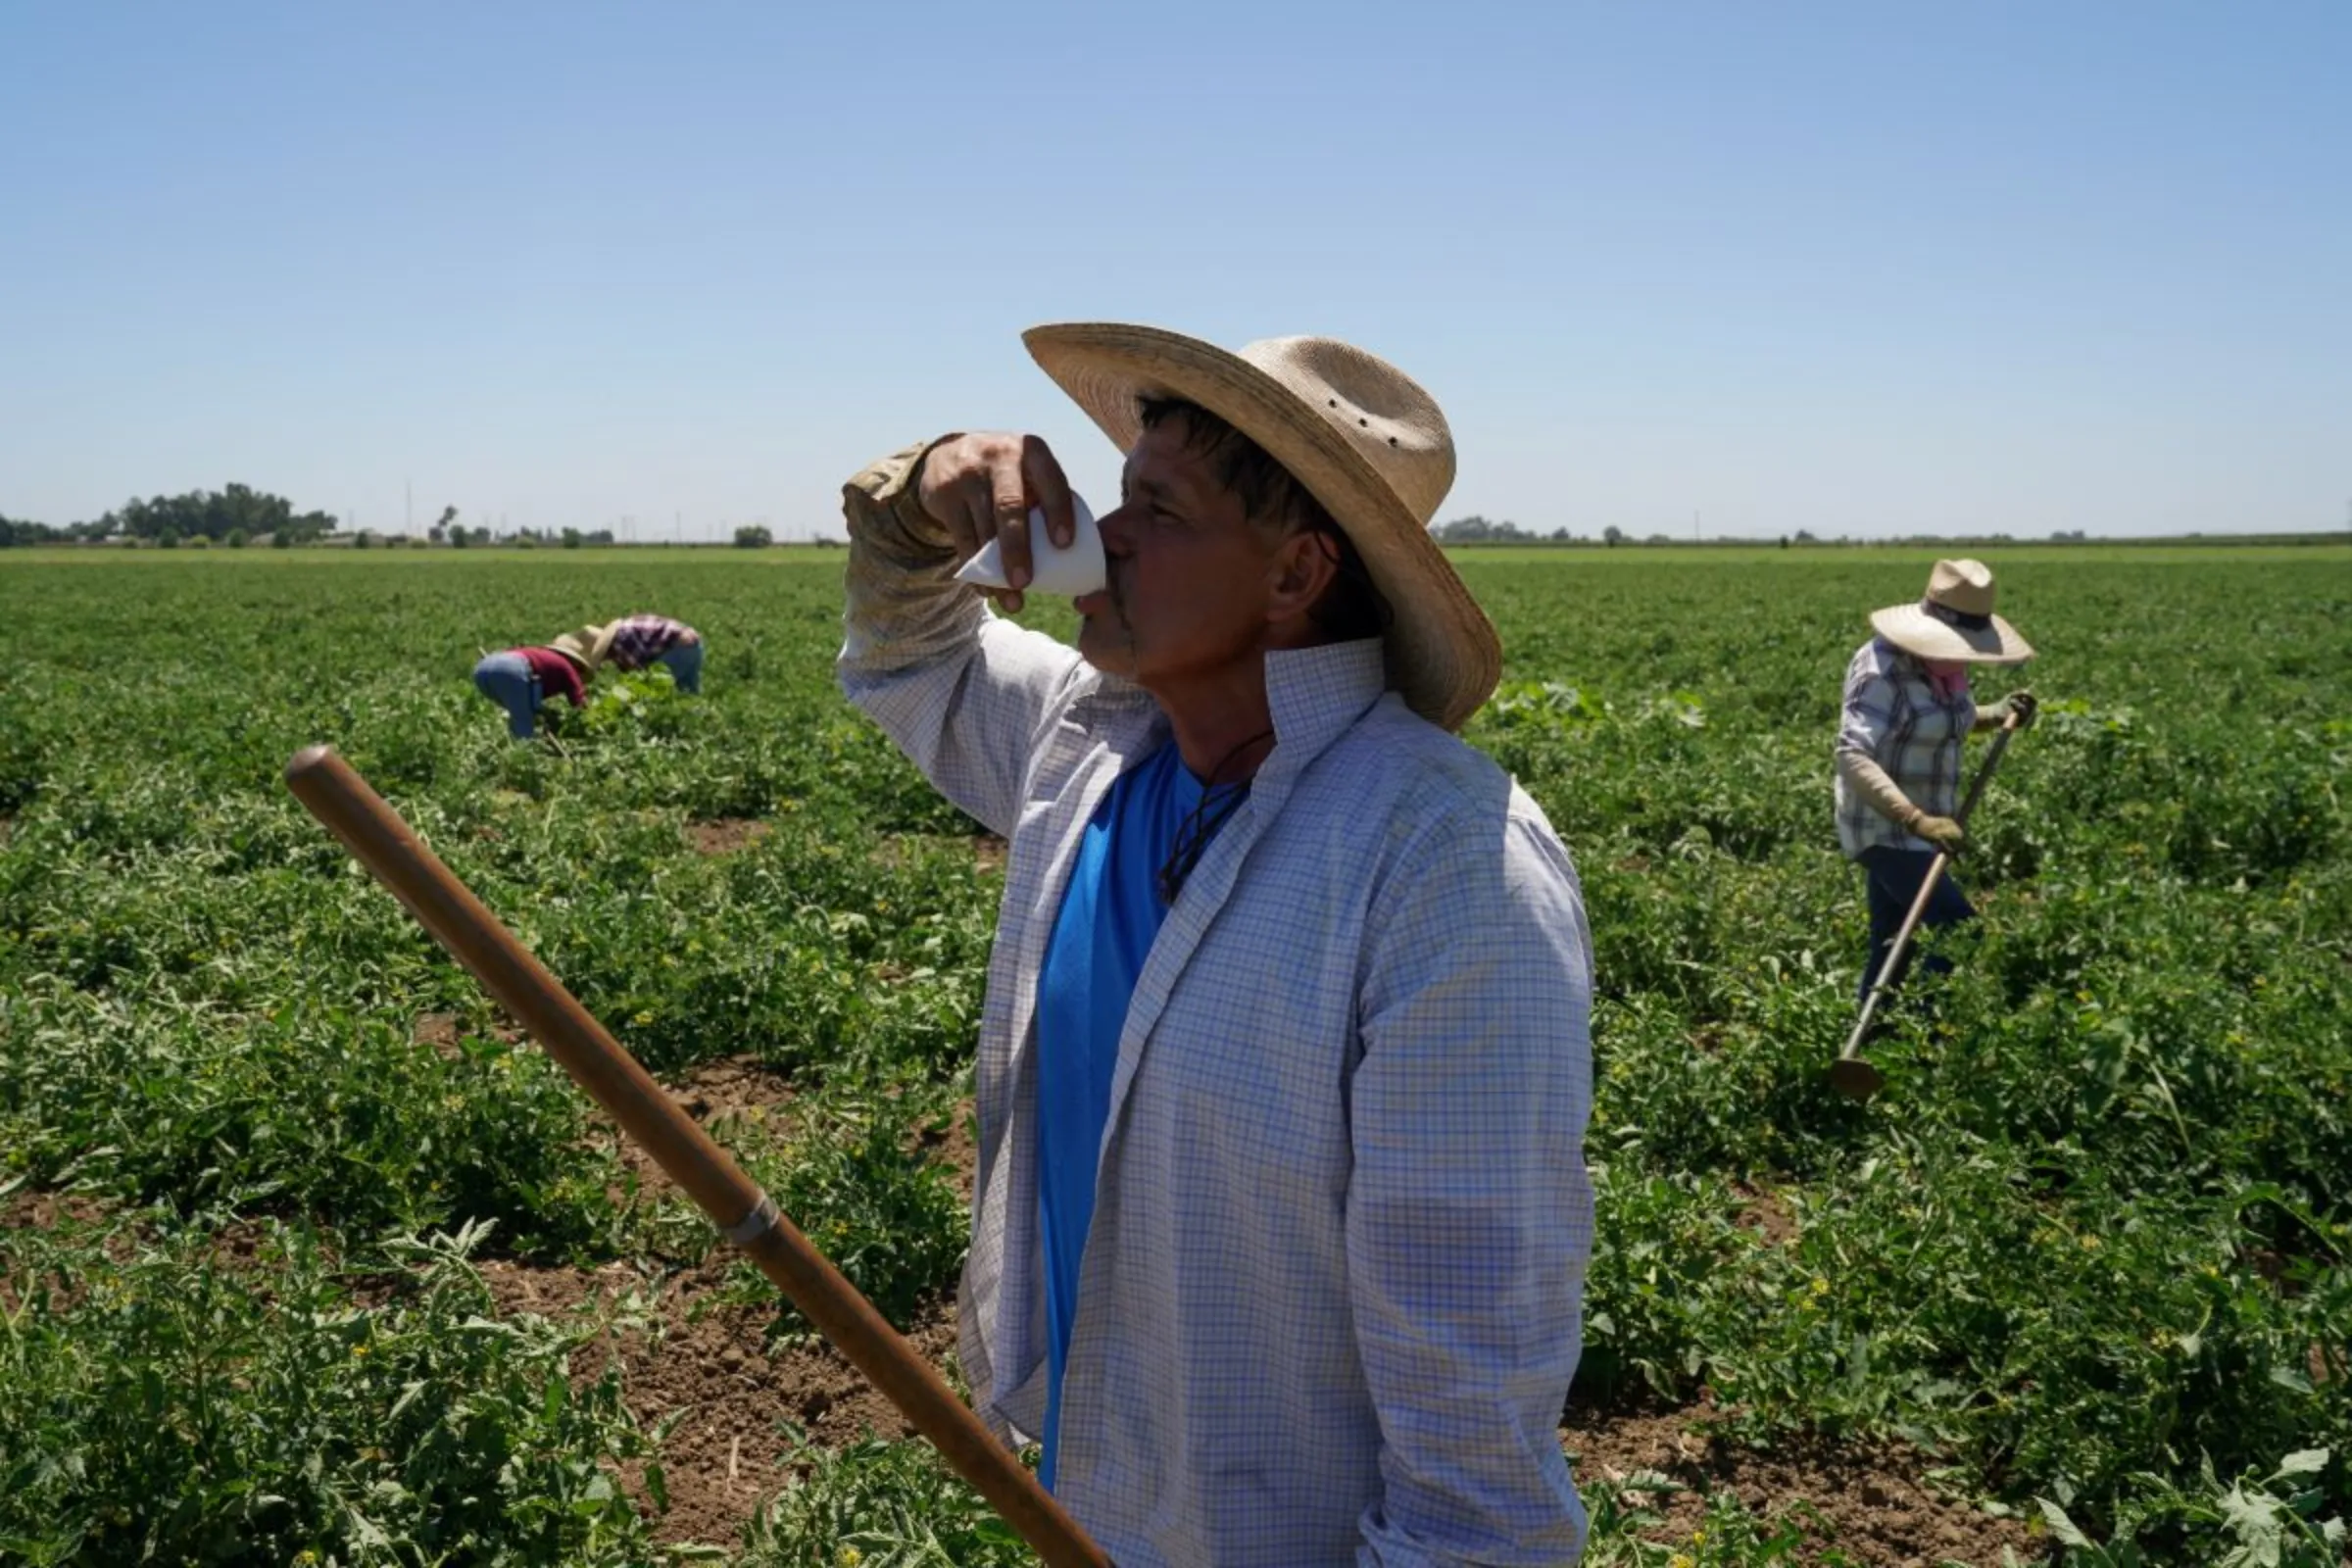 Agricultural worker Ernesto Hernandez takes a water break while enduring high temperatures in a tomato field, as a heat wave affects the region near Winters, California, U.S. July 13, 2023. REUTERS/Loren Elliott